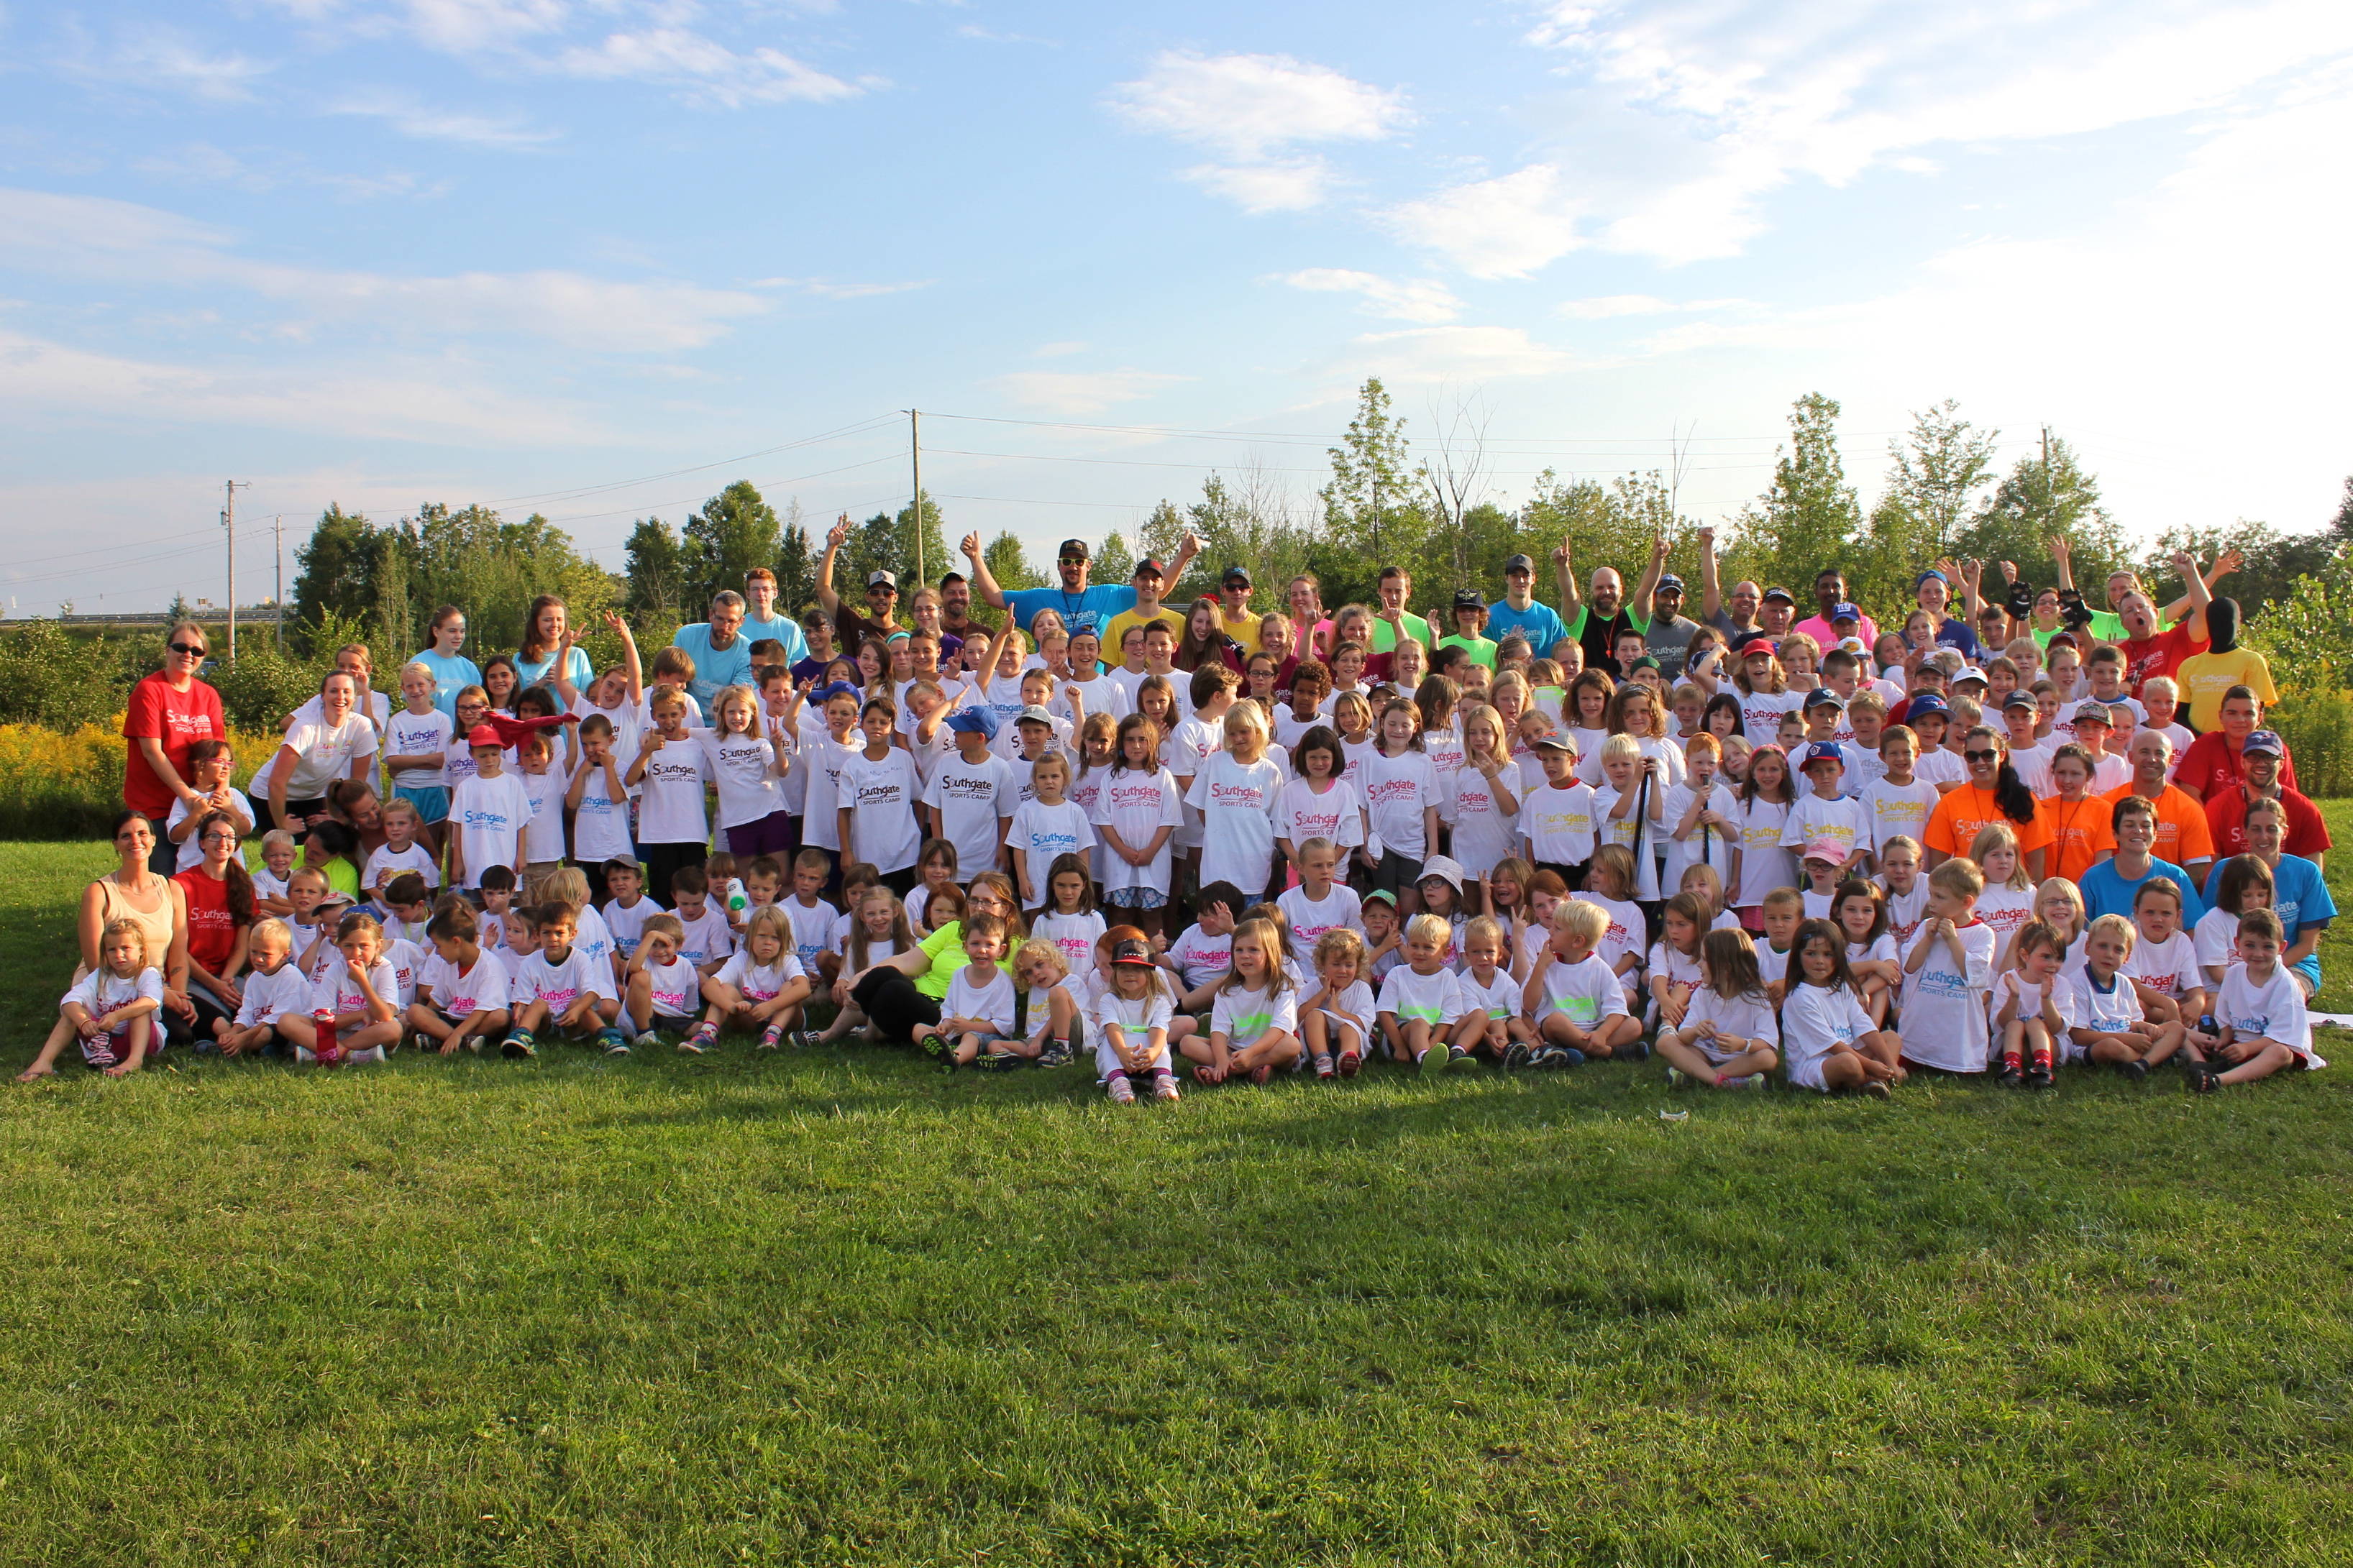 Southgate running free Sports Camp for local kids - My Kemptville Now